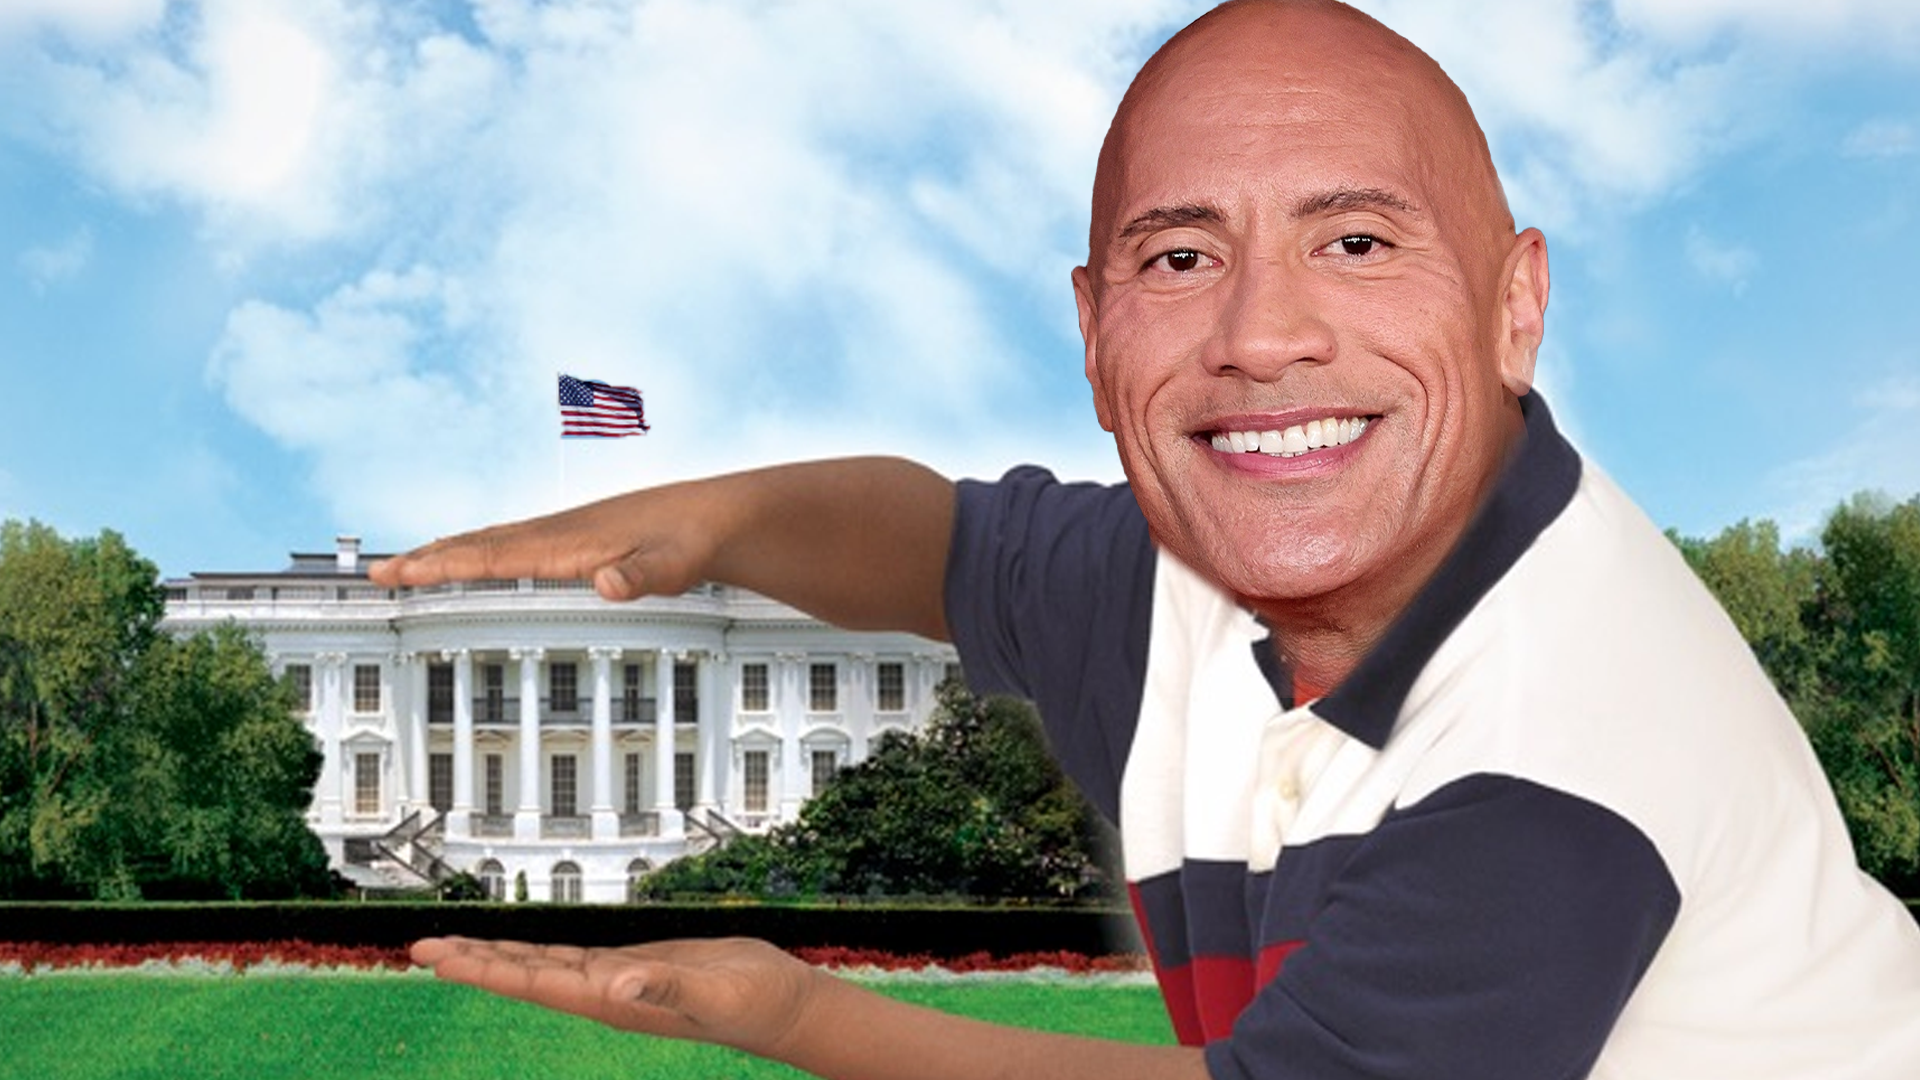 Will 'The Rock' run for president? He reckons US political parties are